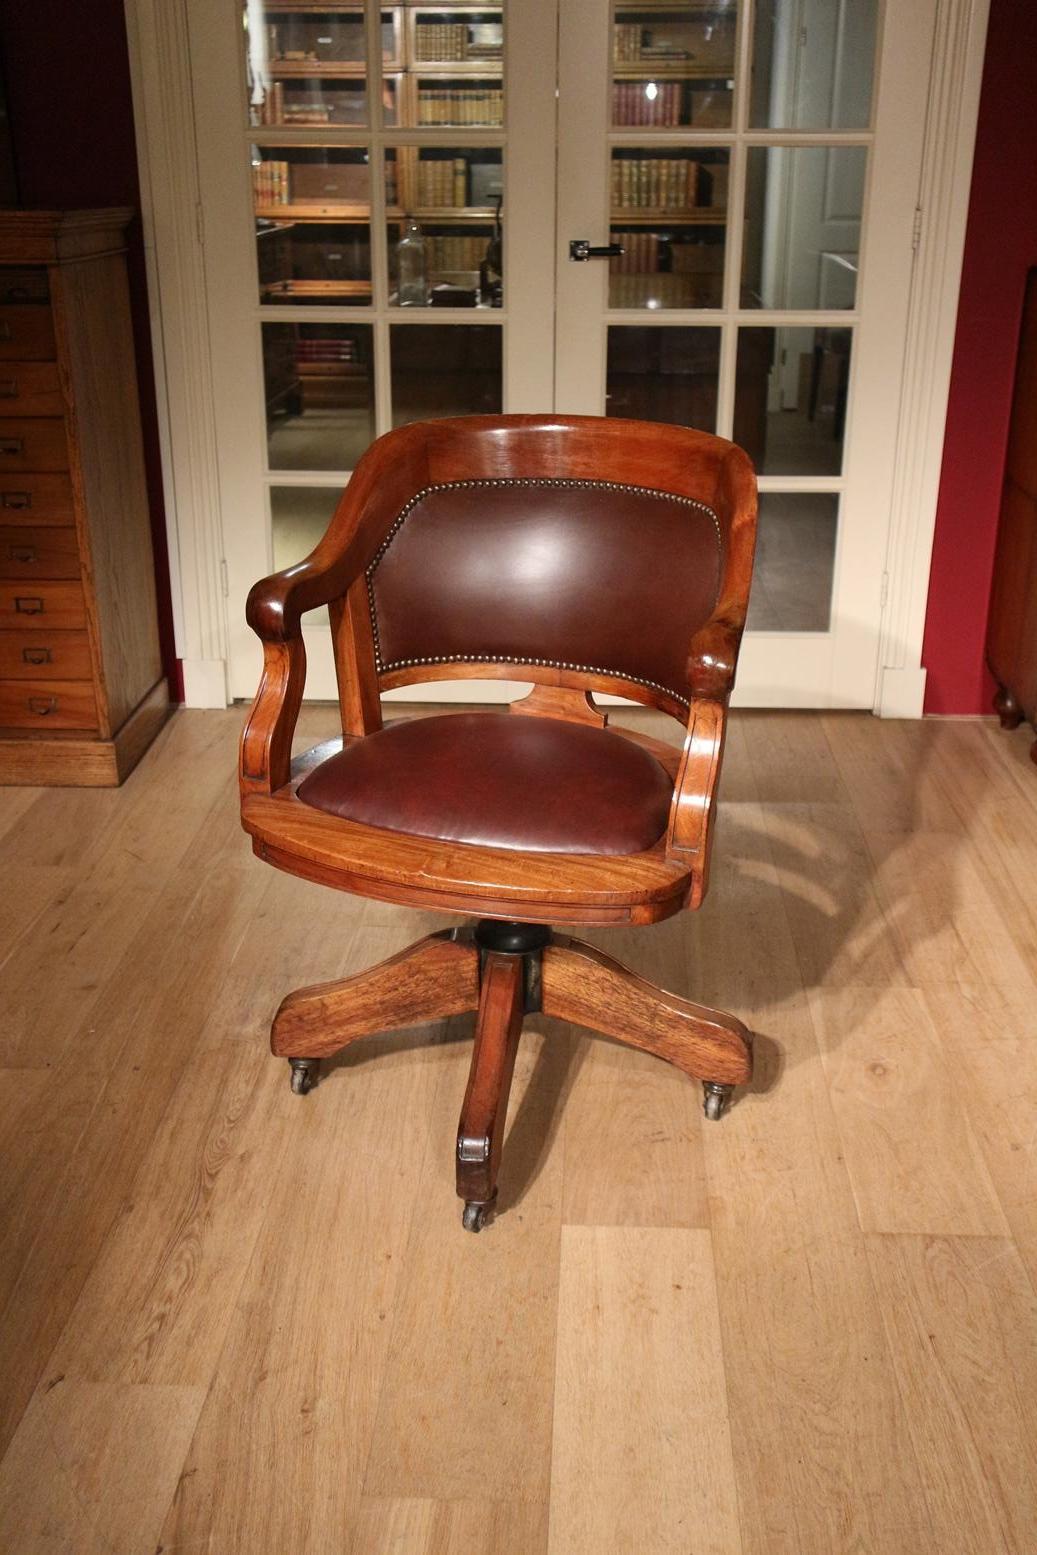 Spacious antique mahogany desk chair with leather upholstery. Chair is height adjustable and equipped with adjustable rocking mechanism. The chair is on iron wheels. Entirely in perfect condition.

Origin: England
Period: Approx. 1900
Size Bro.